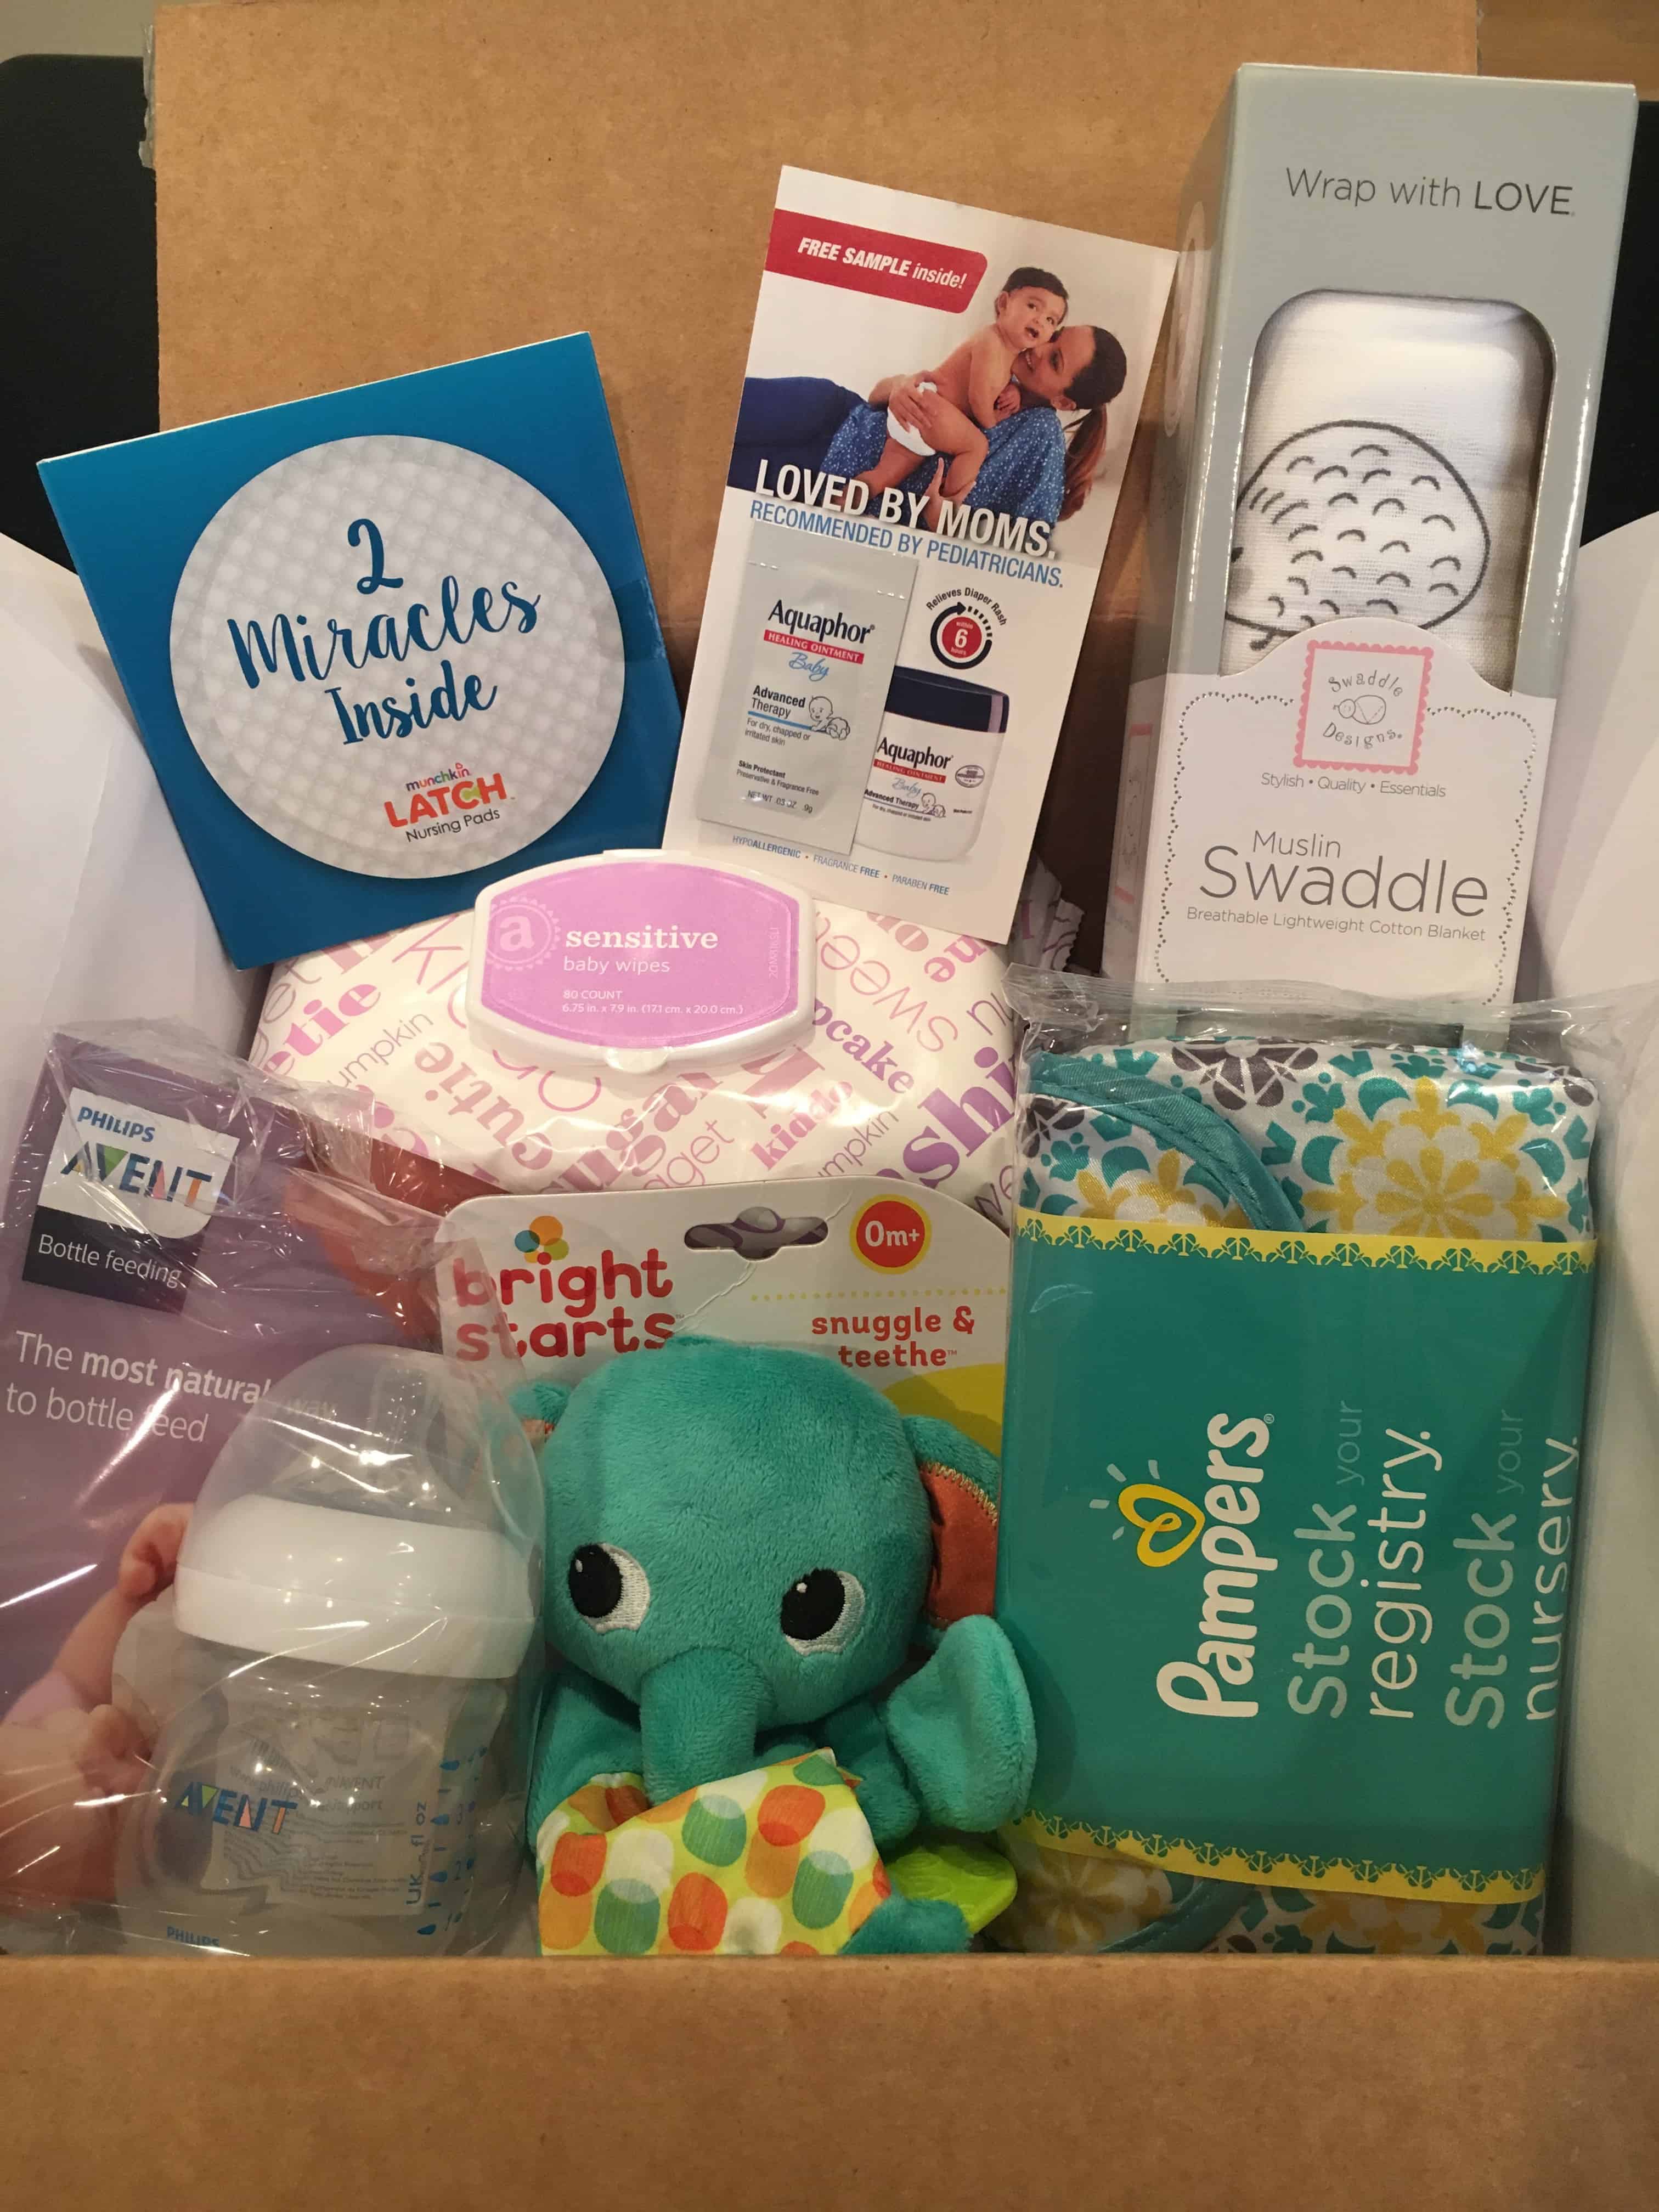 Free 35 Amazon Baby Box, 15 Off Code, & Free Returns for 90